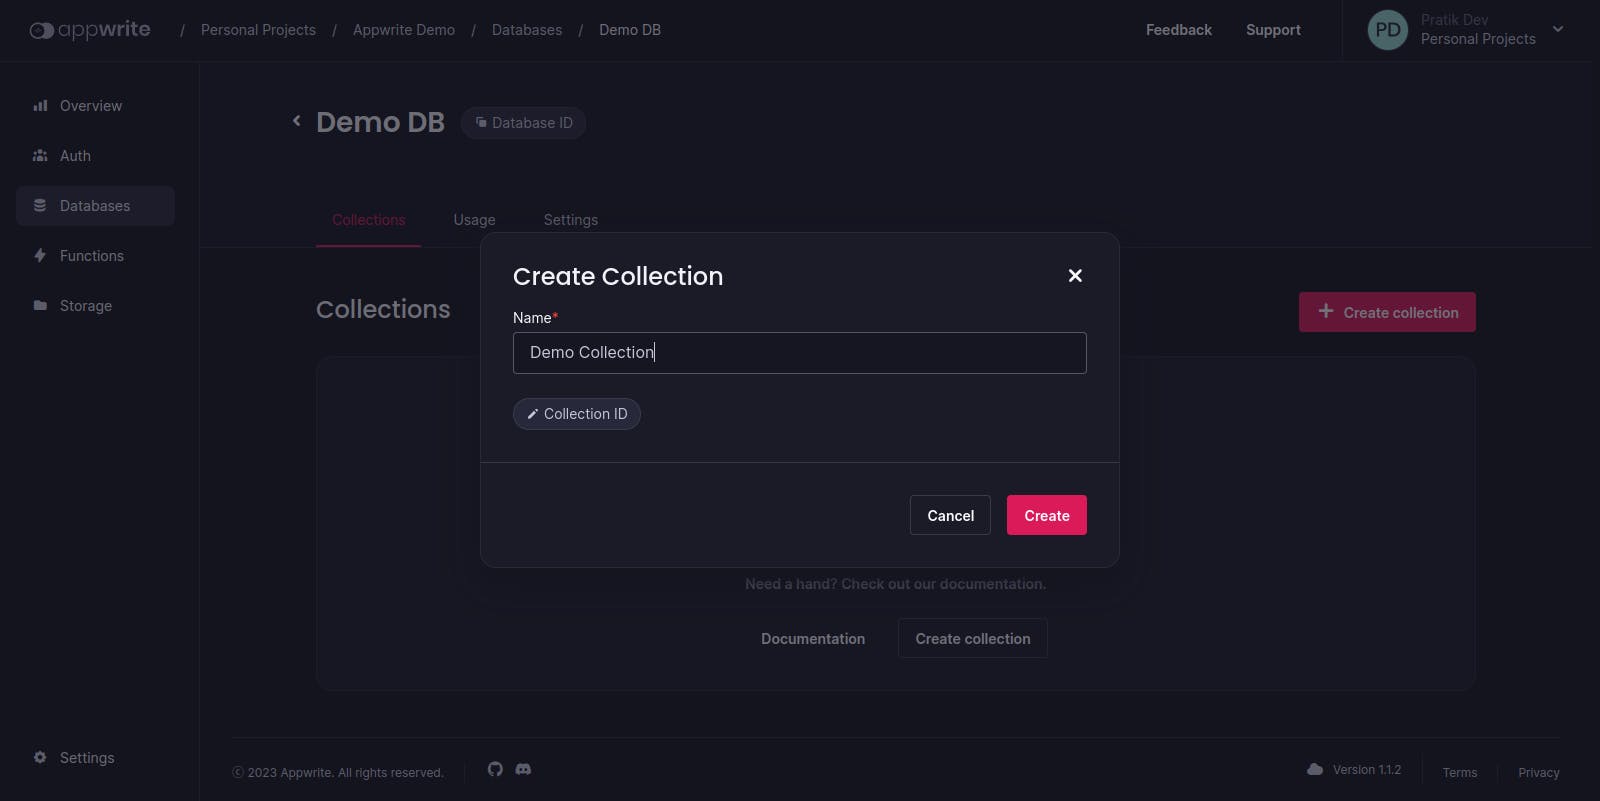 A screenshot that shows the collection creation process